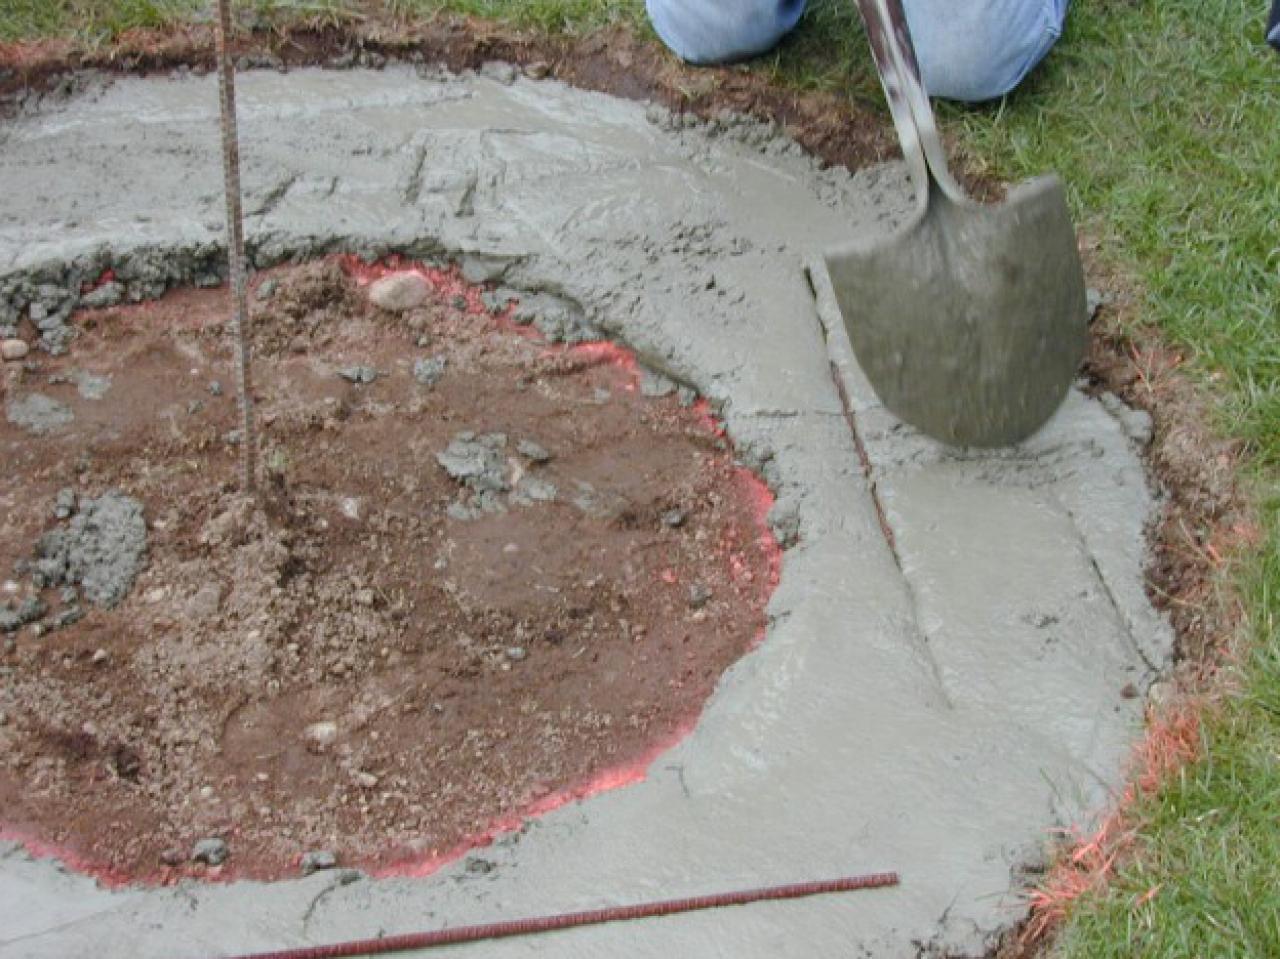 How To Prepare For A Fire Pit Tos, Protect Concrete From Fire Pit